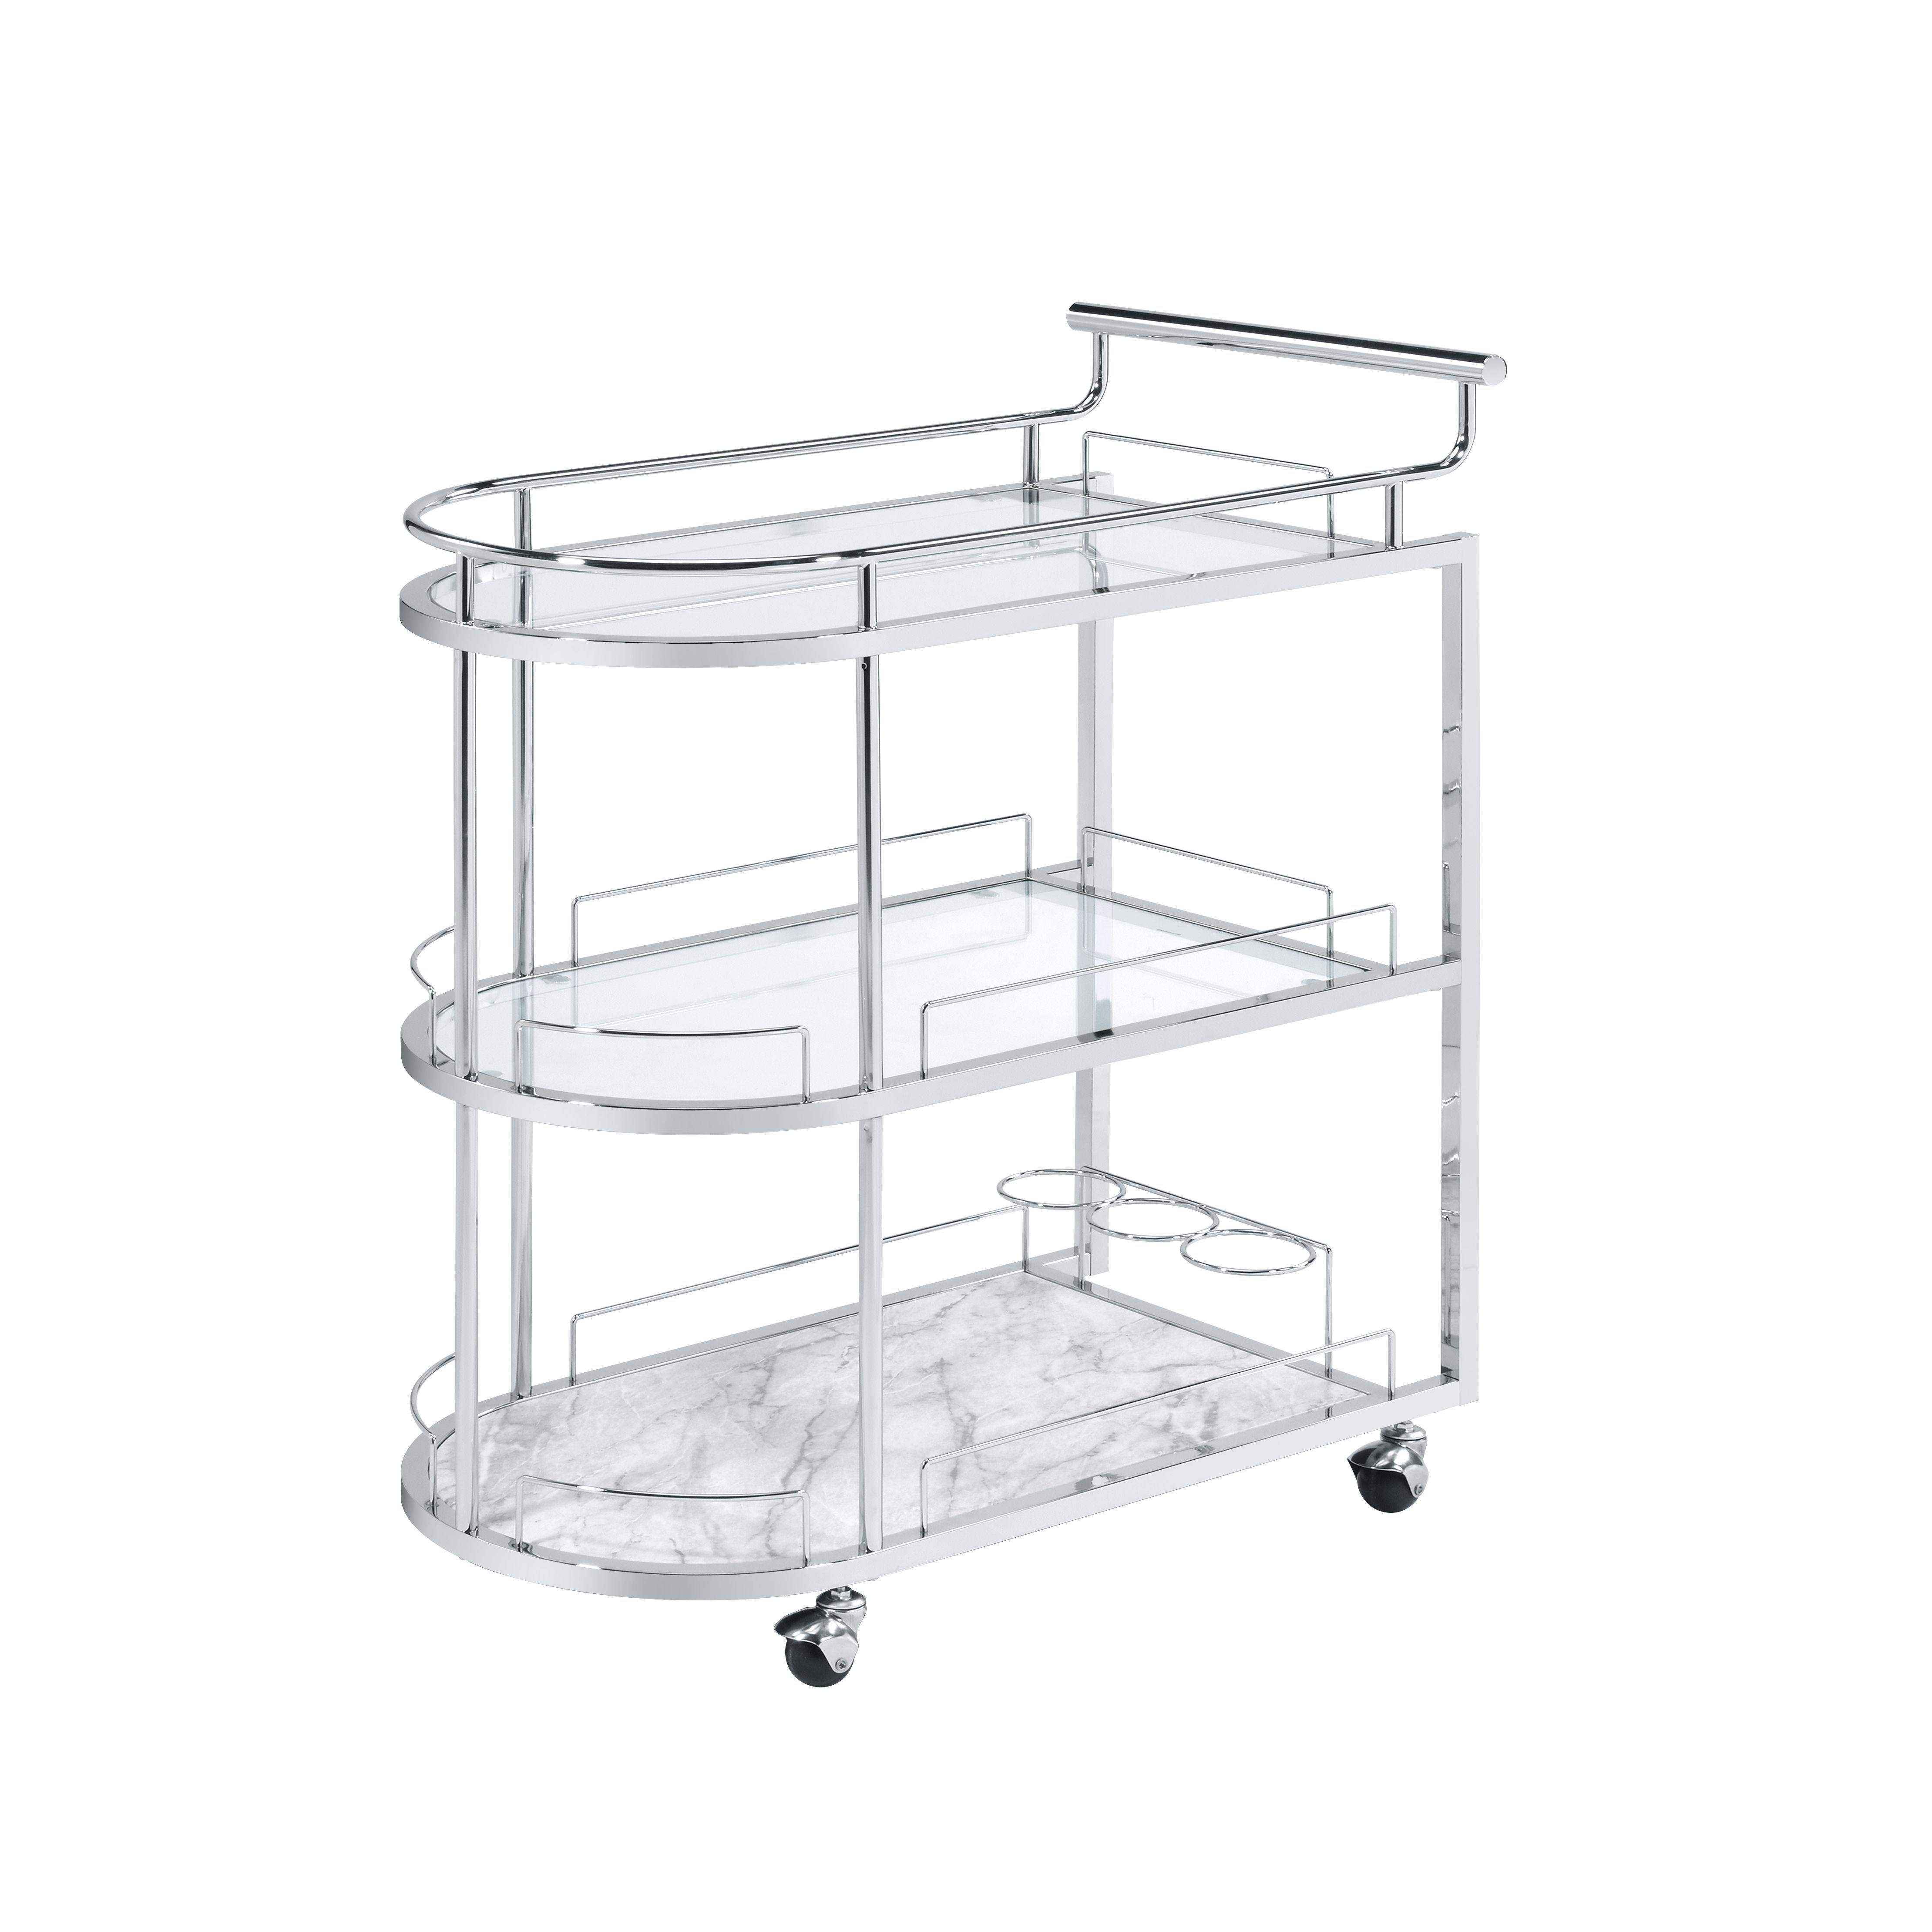 ACME - Inyo - Serving Cart - Clear Glass & Chrome Finish - 5th Avenue Furniture